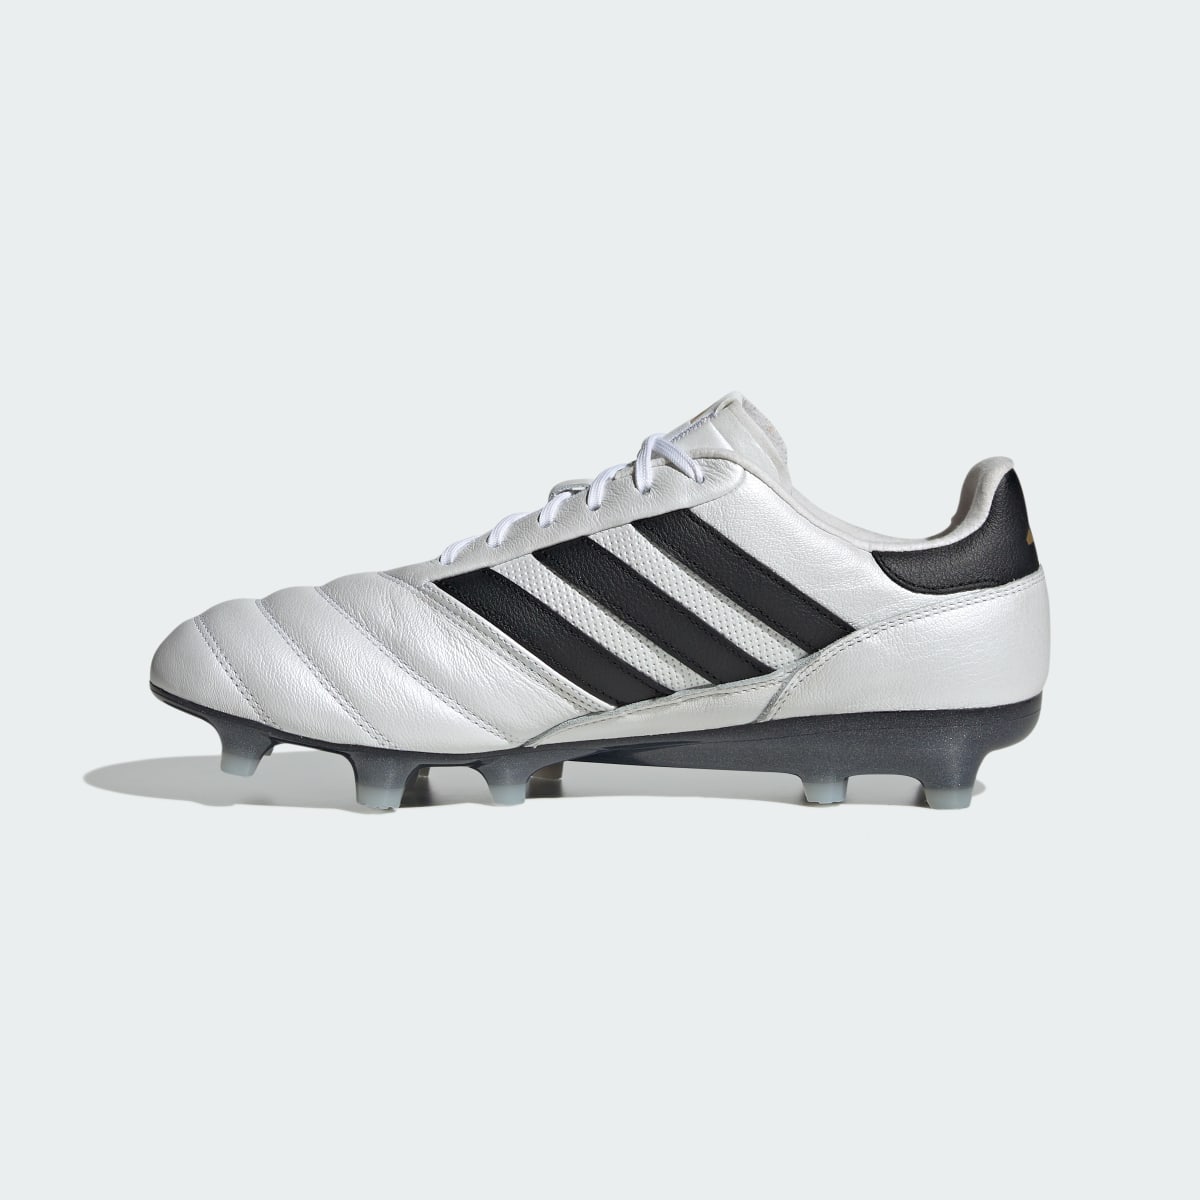 Adidas Copa Icon Firm Ground Boots. 7